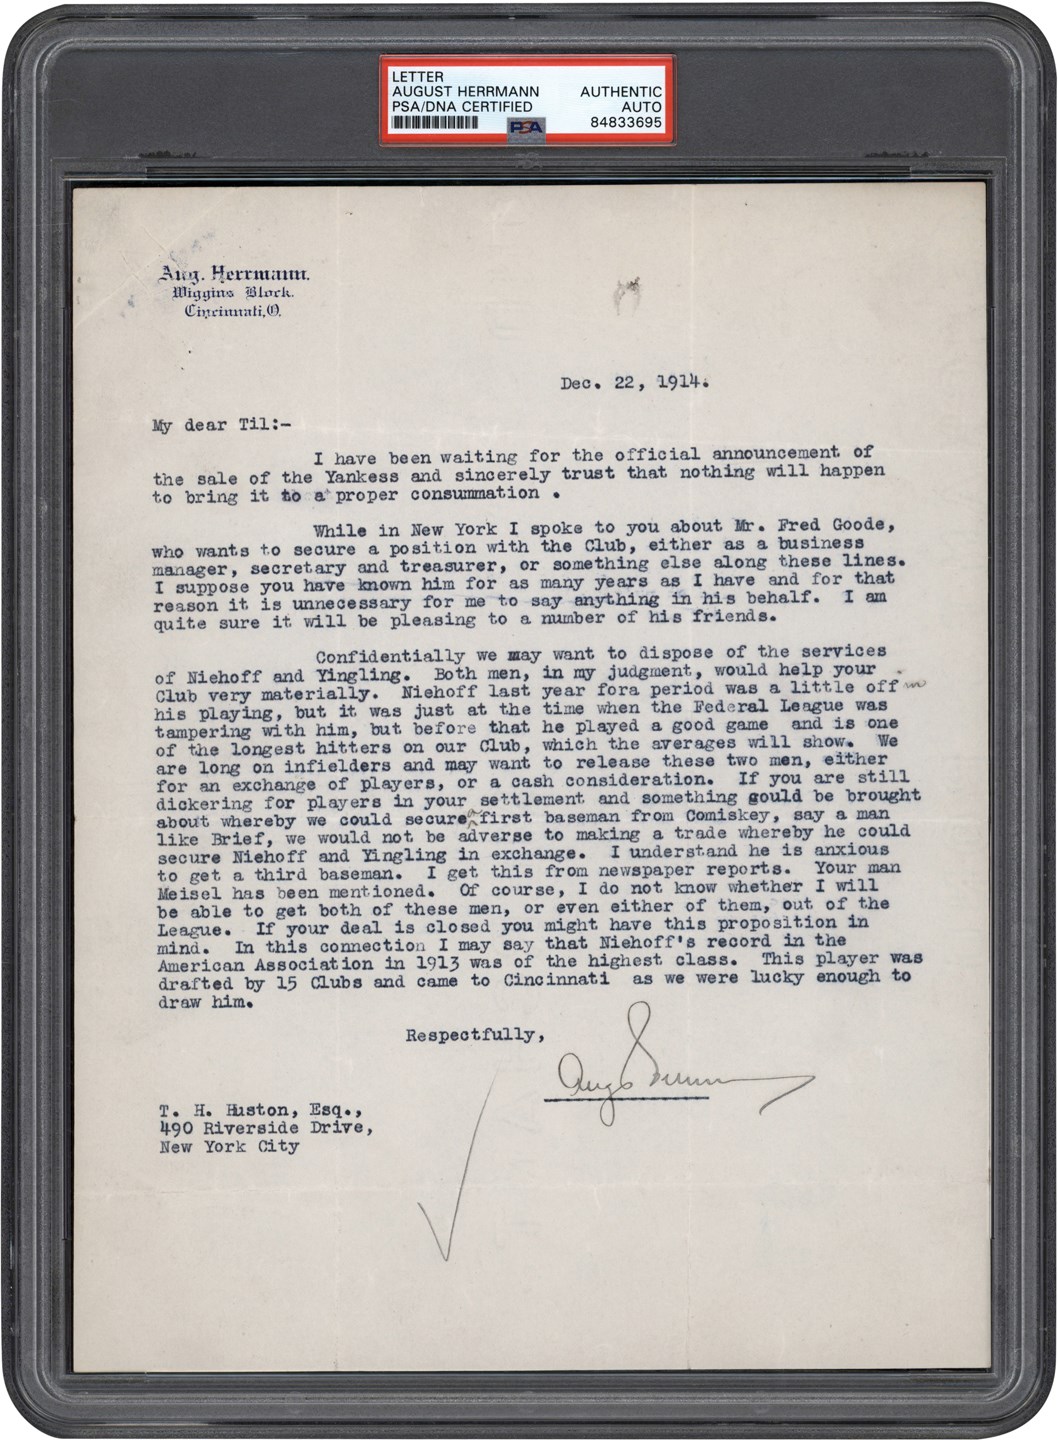 - December 22nd, 1914, August Herrmann Signed "Sale of the Yankees" Letter to Colonel Tillinghast Huston Three Weeks Before Sale was Completed - Includes Response from Huston Five Days Before Sale was Announced (ex-Barry Halper Collection)